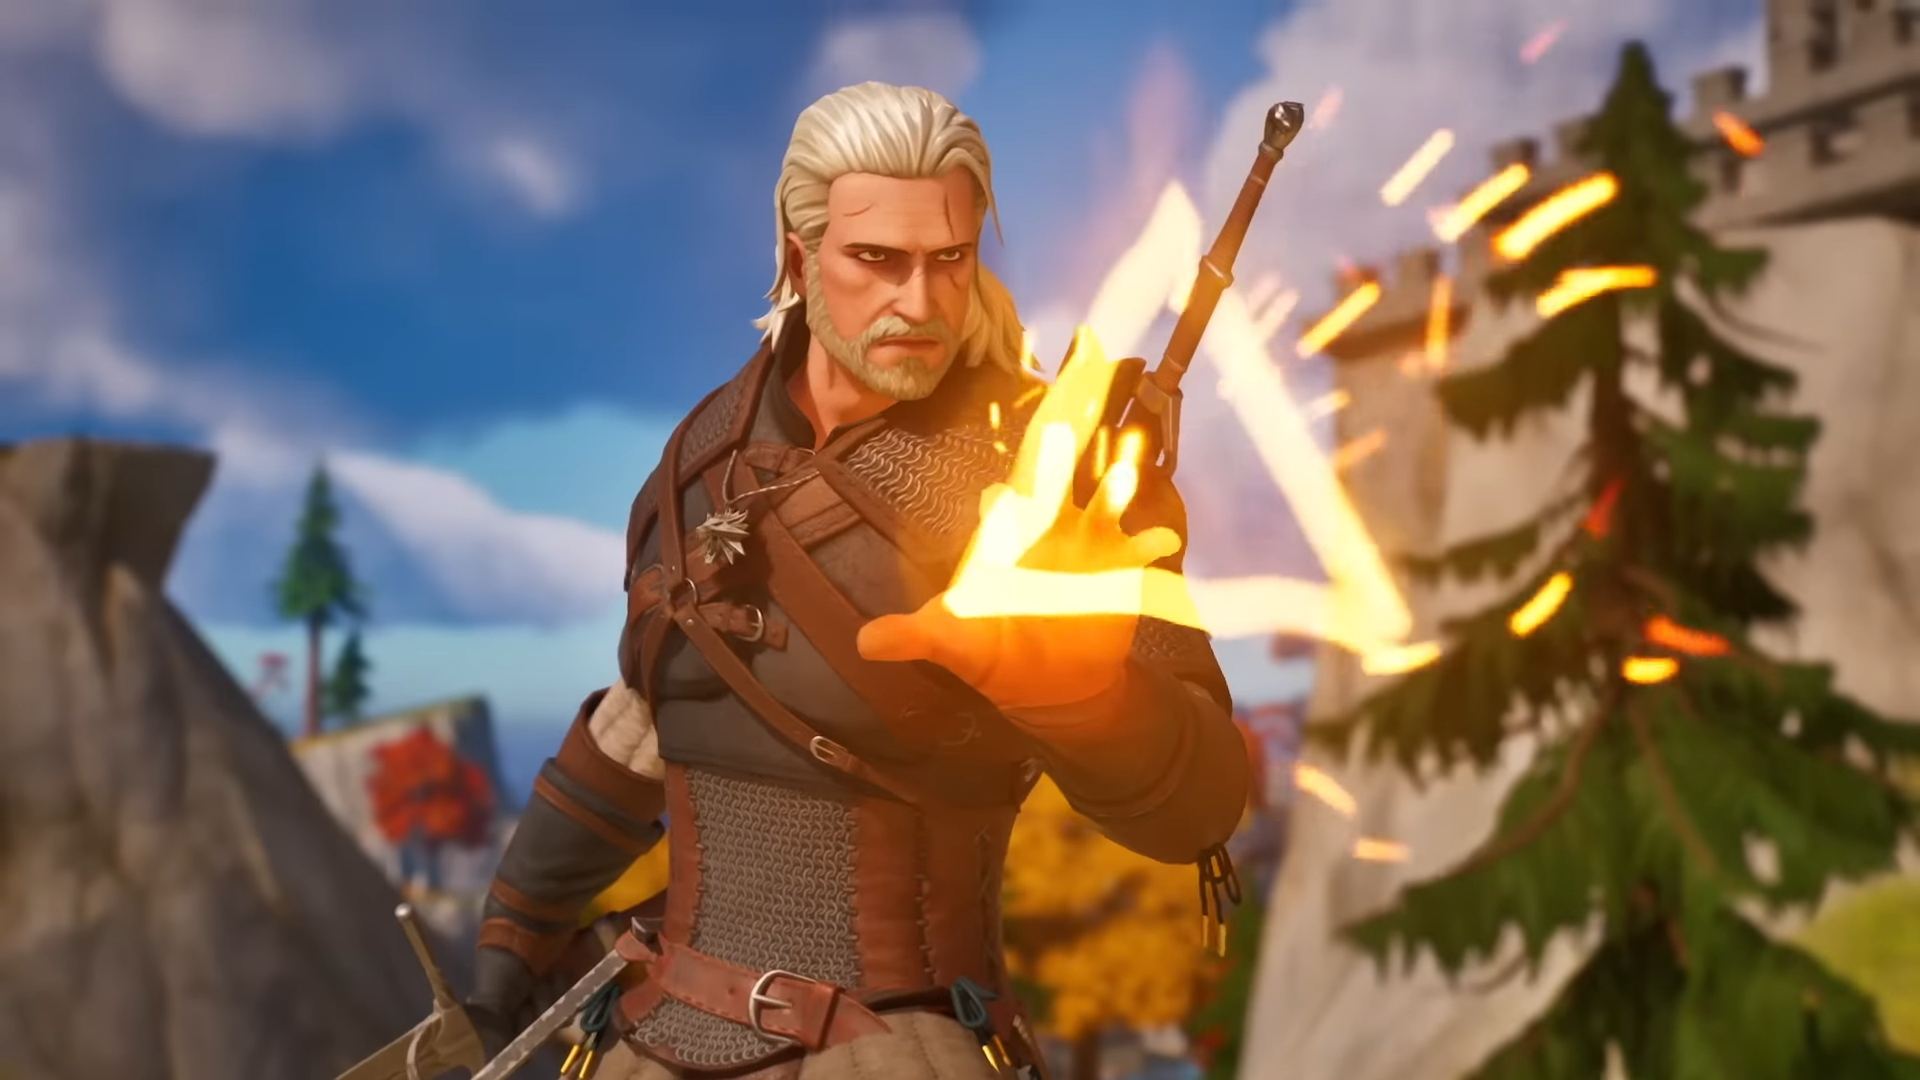 Fortnite x Witcher - How to get Geralt - 2